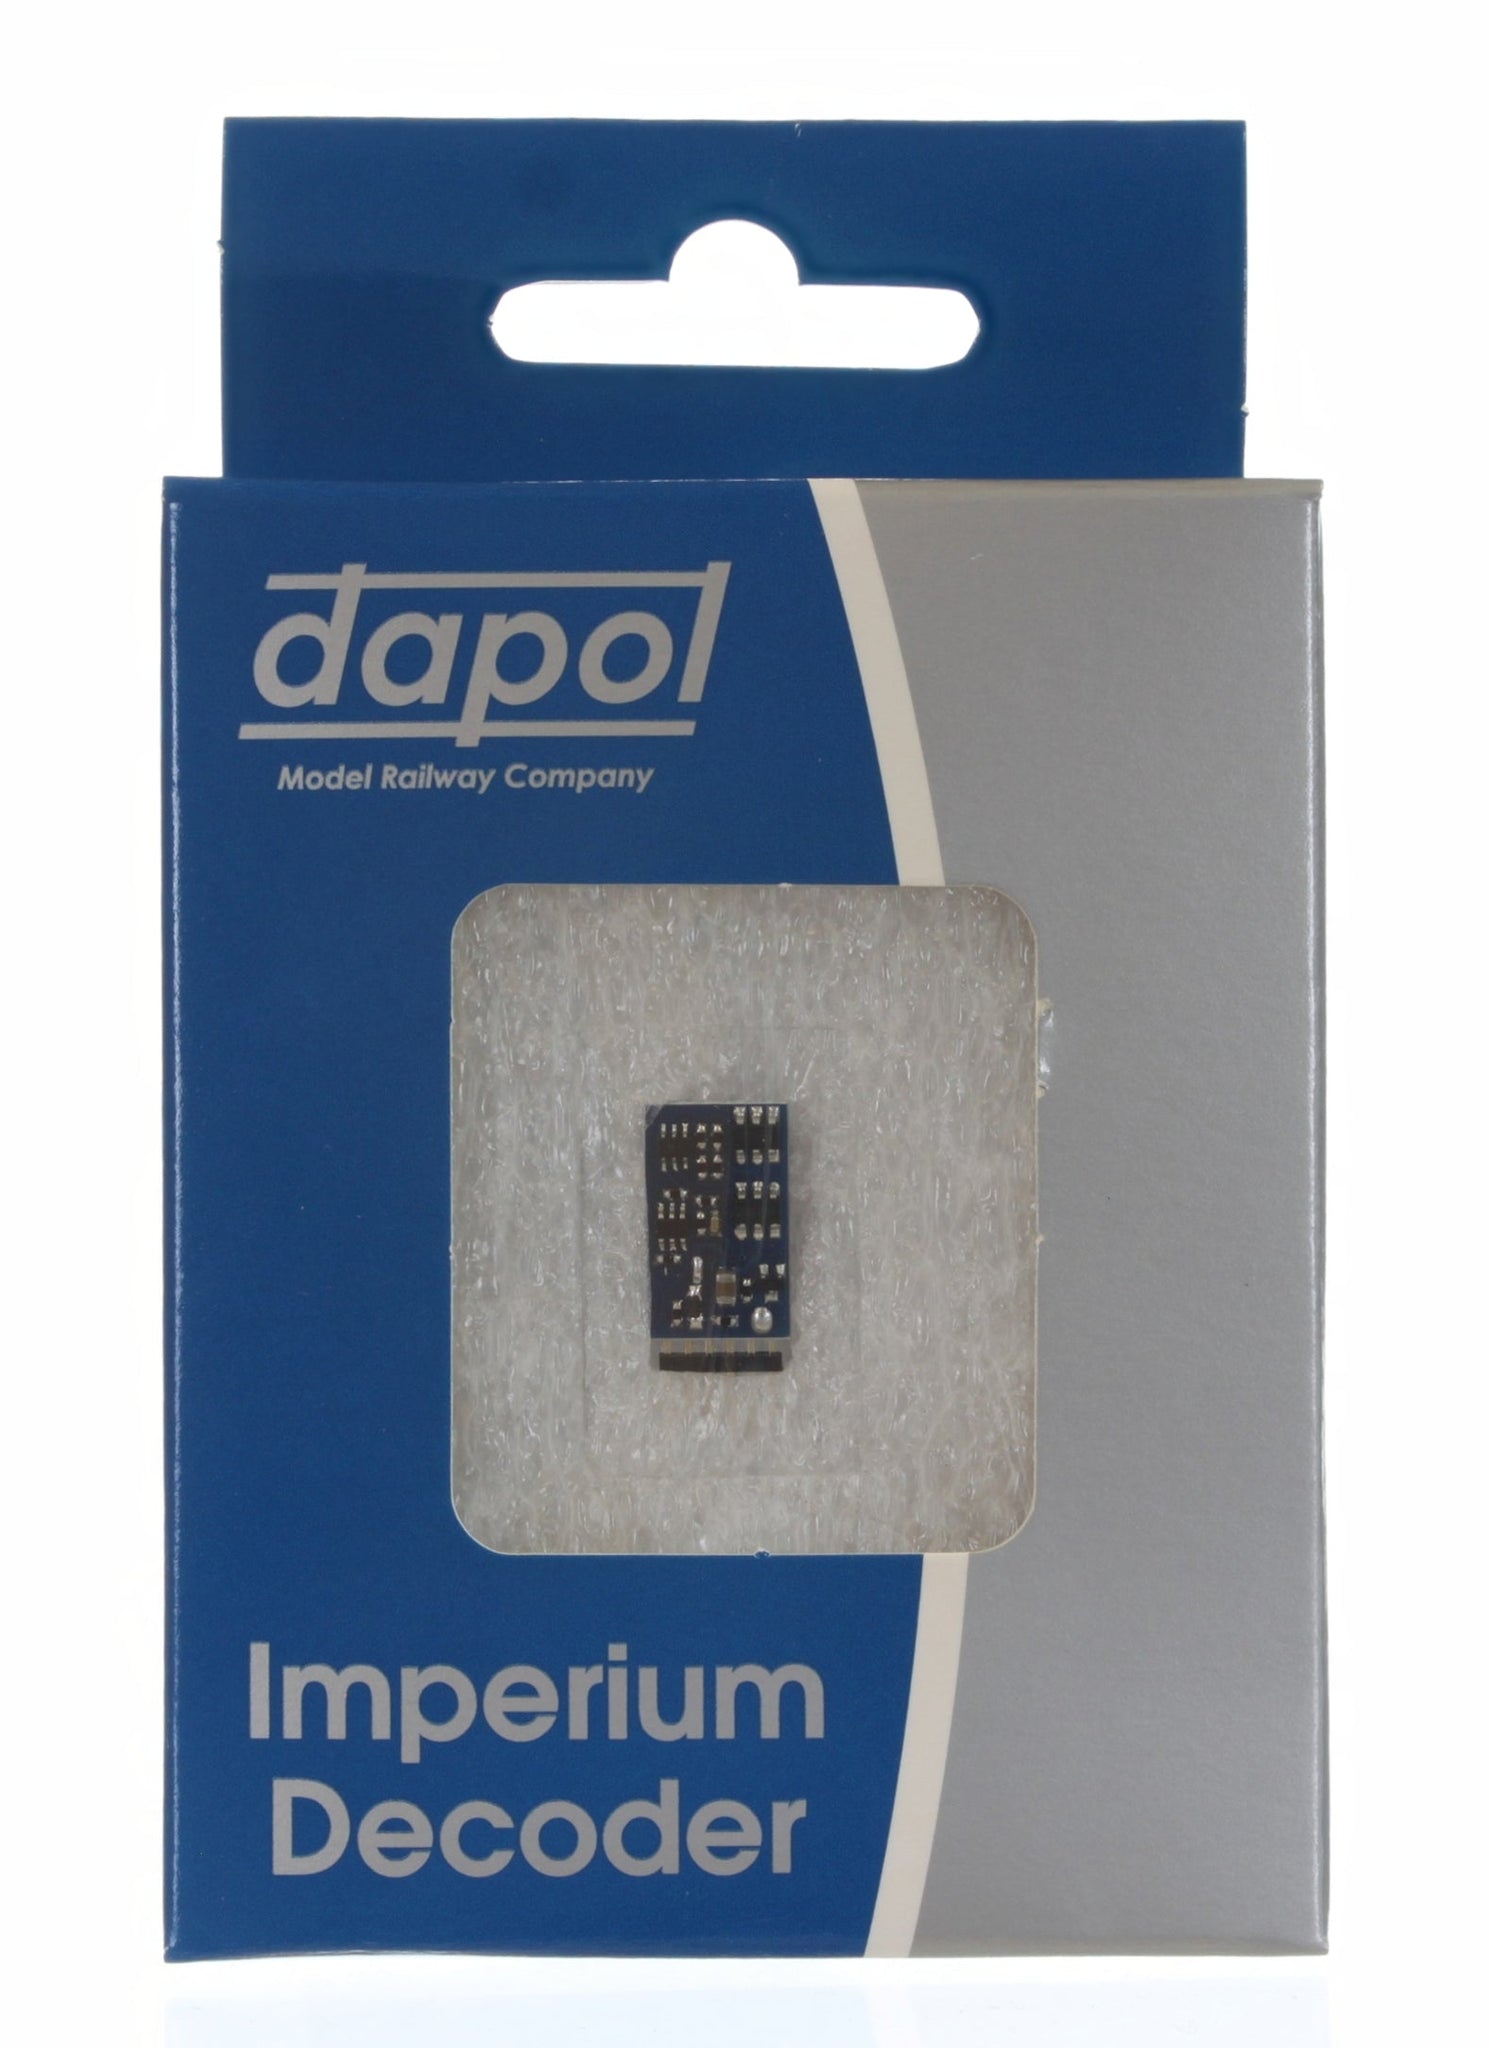 Imperium 5- Micro 6 Pin 2 Function Decoder 10 x 8.4 x 2.8mm